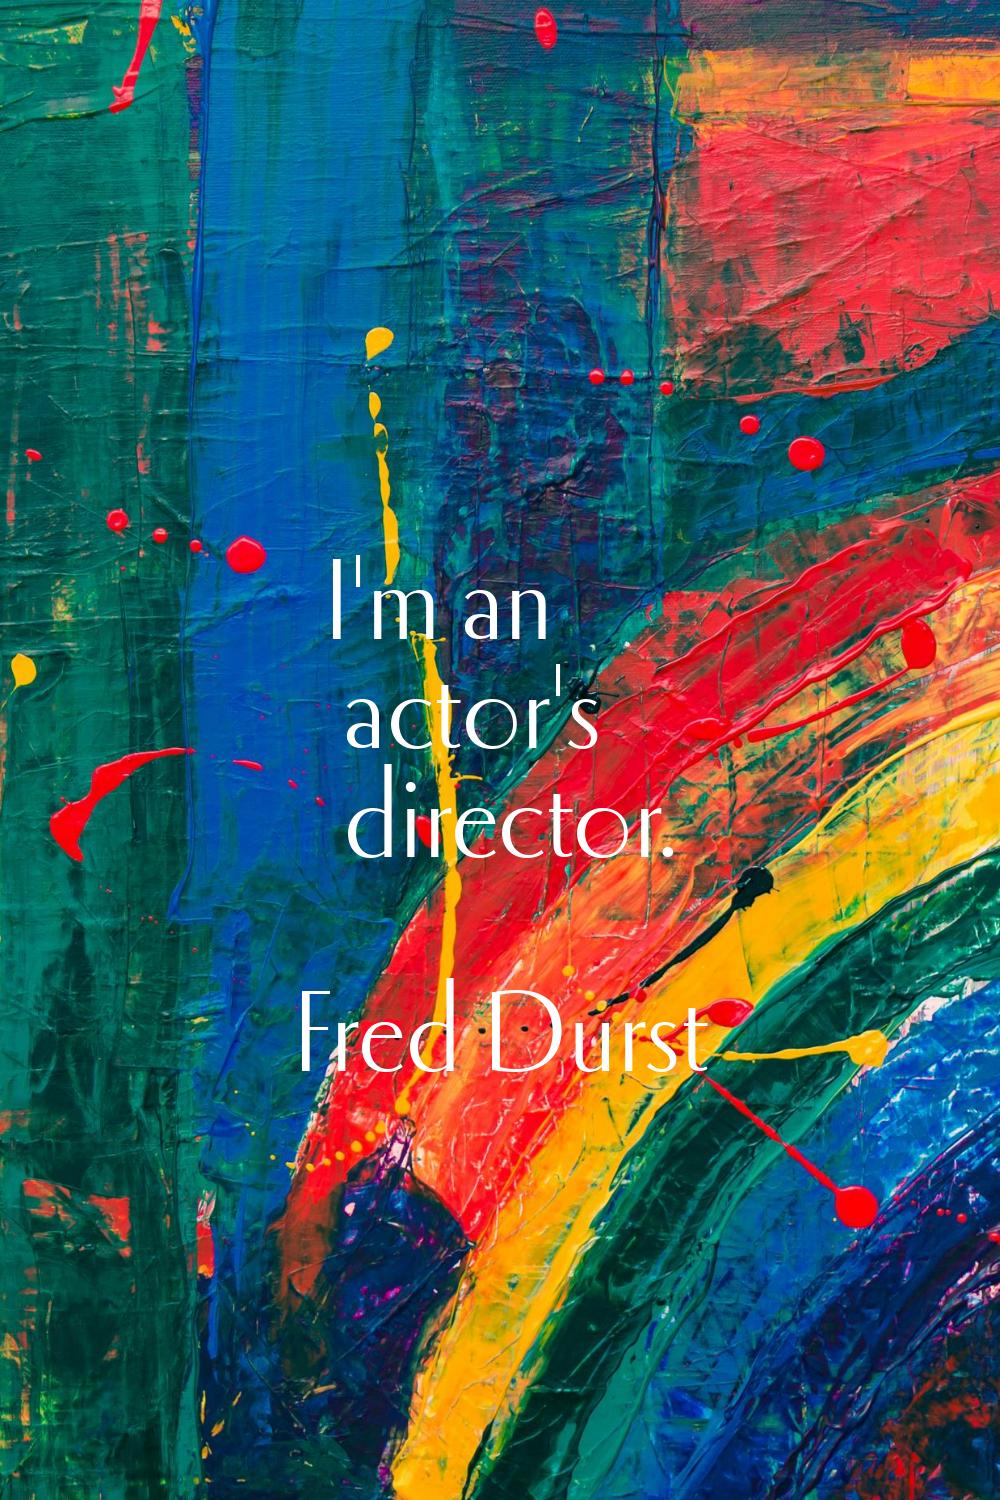 I'm an actor's director.